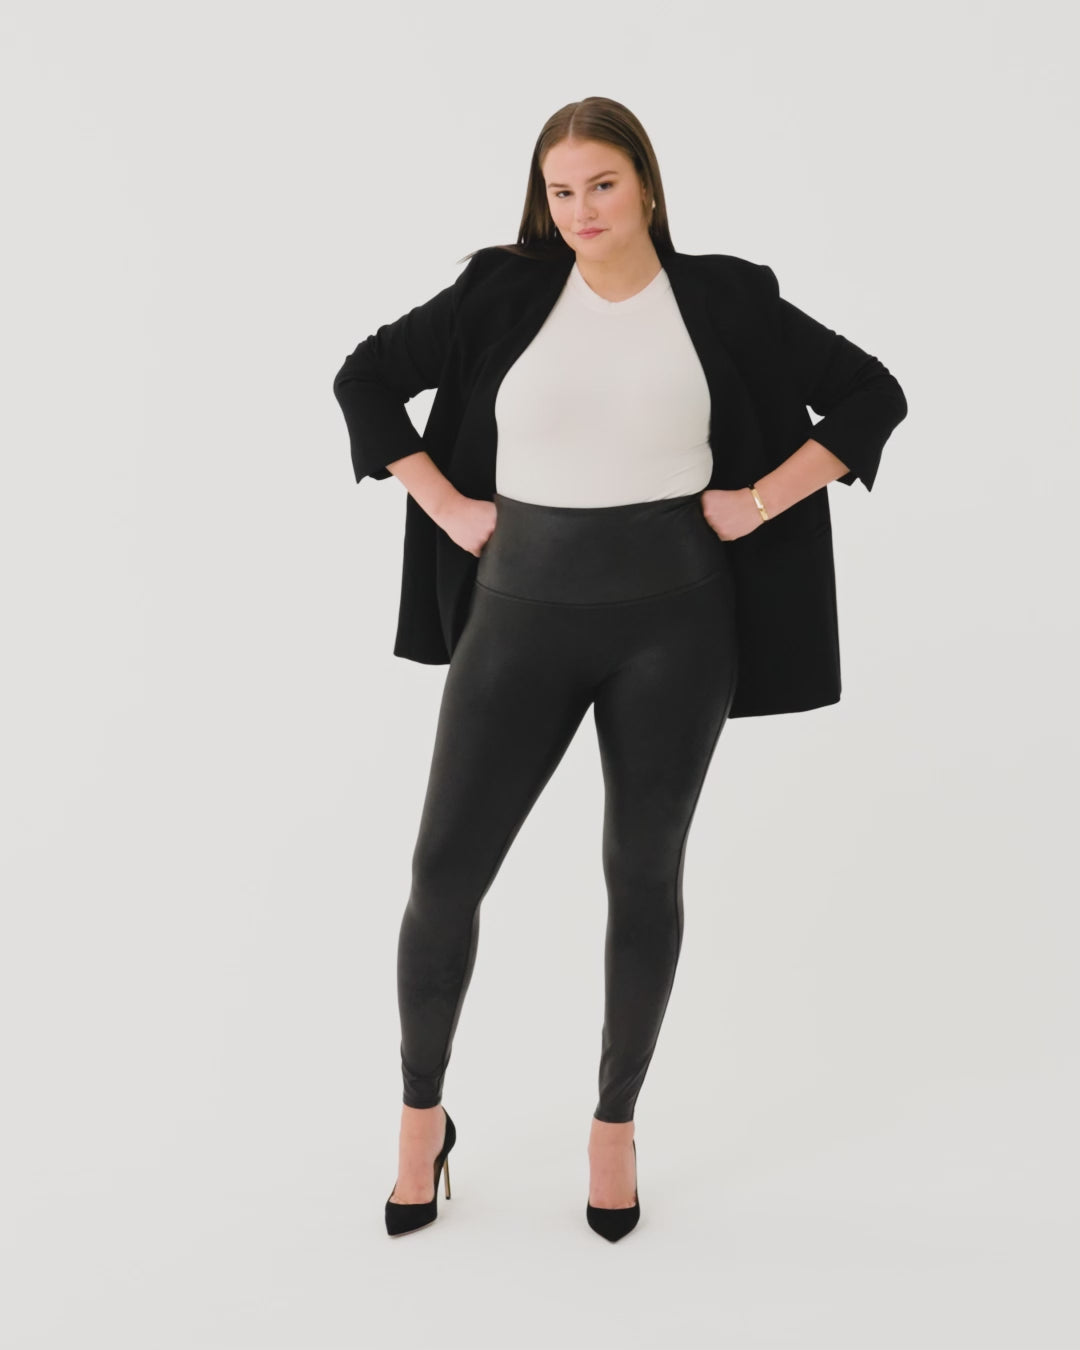 Spanx's New Fleece-Lined Faux-Leather Leggings Are Out Now